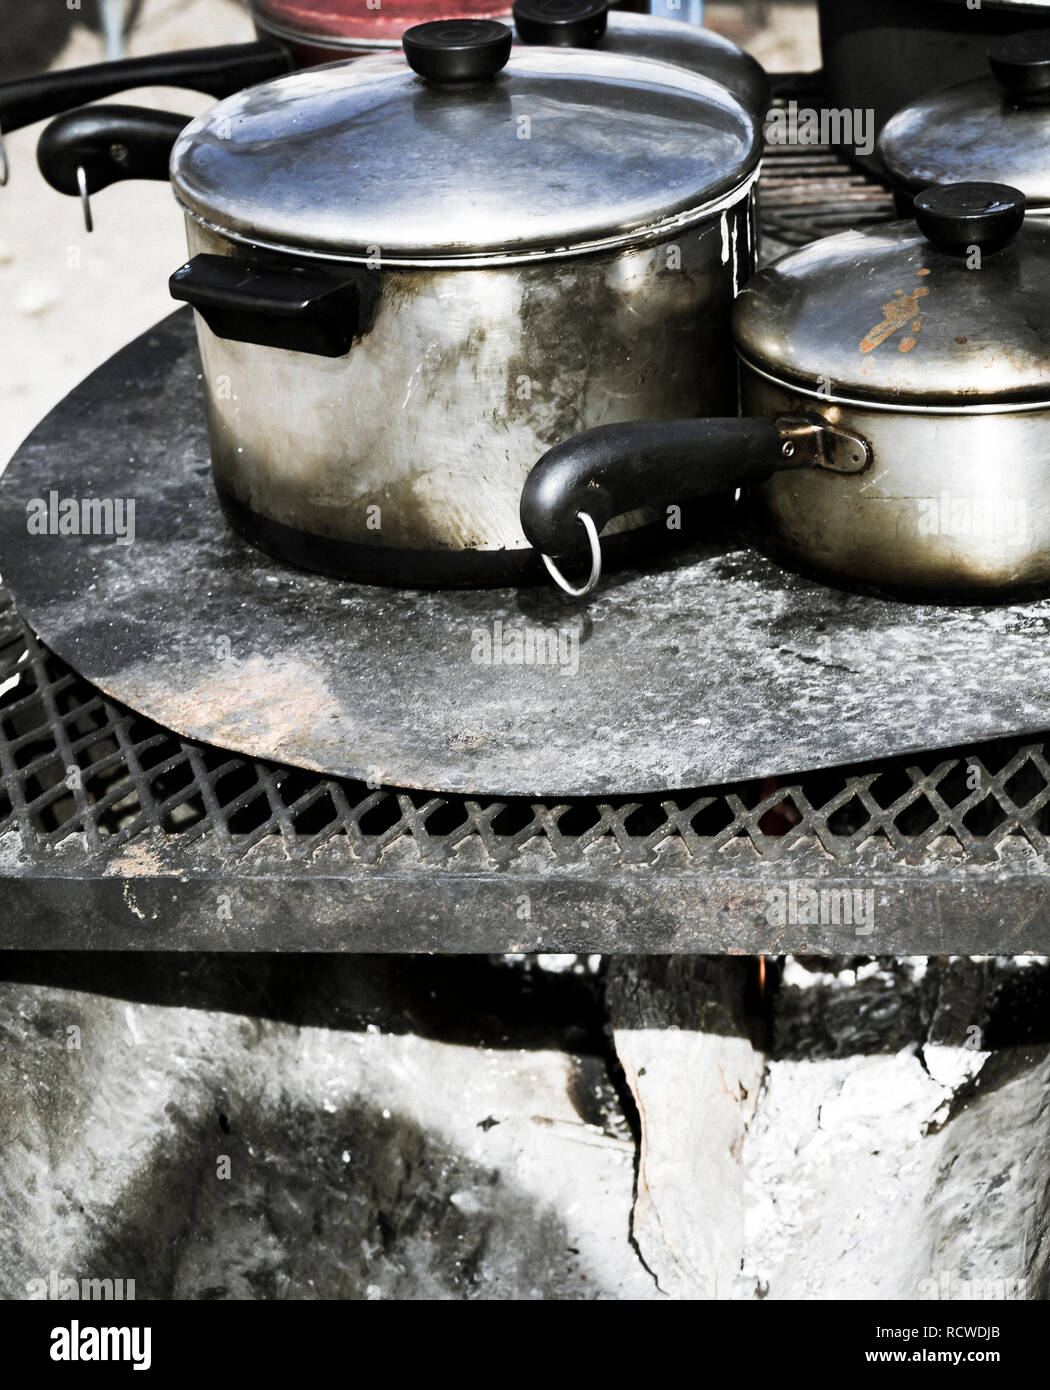 https://c8.alamy.com/comp/RCWDJB/close-up-of-aluminum-pots-and-pans-with-lids-cooking-outside-on-a-fire-pit-RCWDJB.jpg